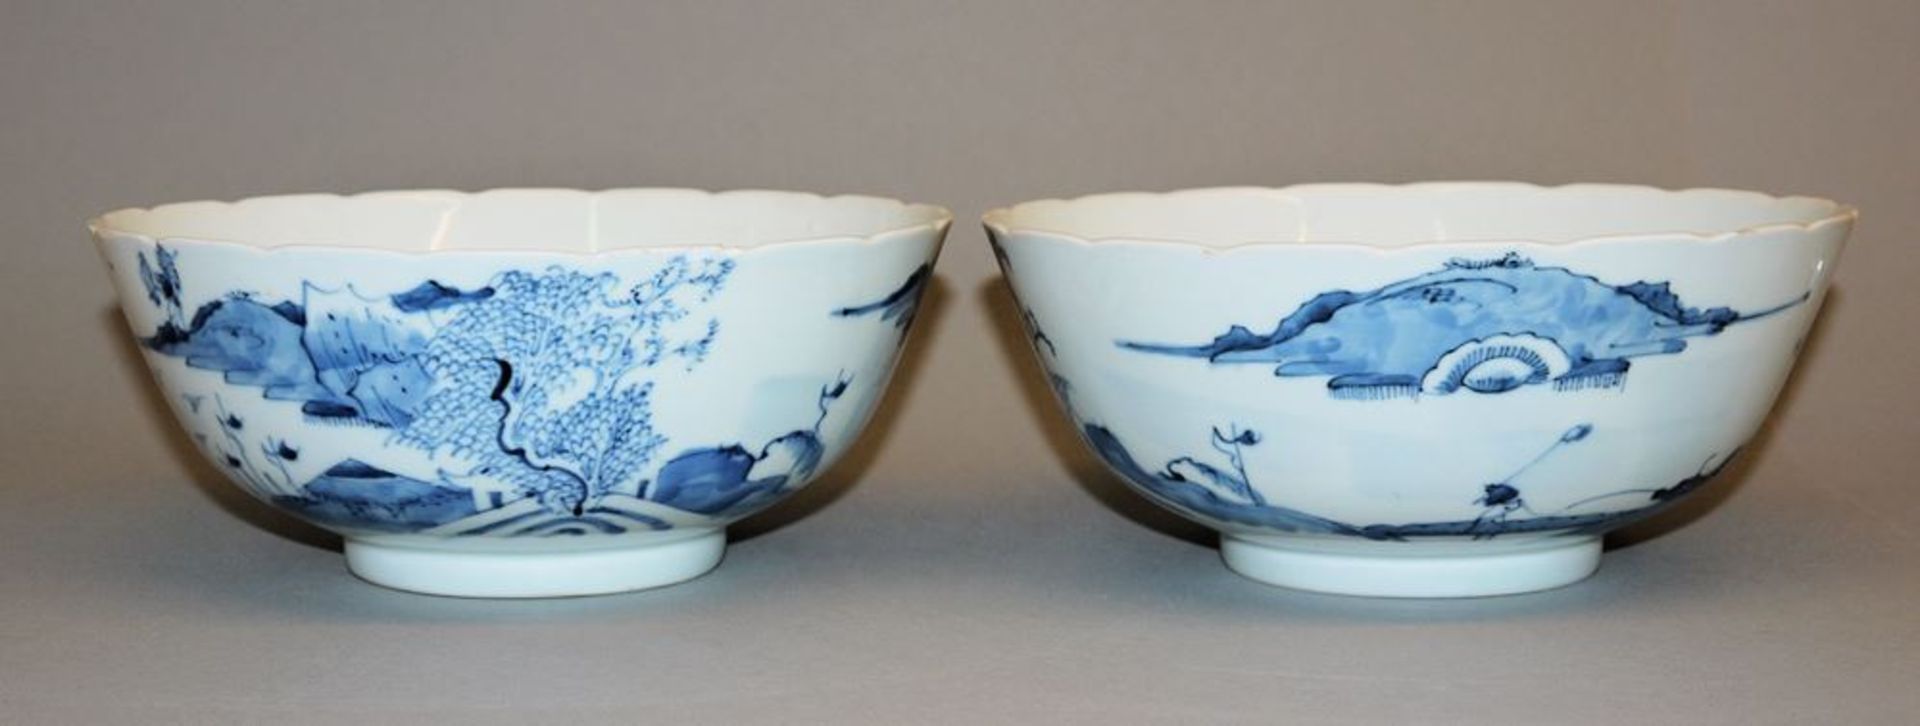 Pair of blue and white porcelain rice bowls of the late Qing period, China 19th century